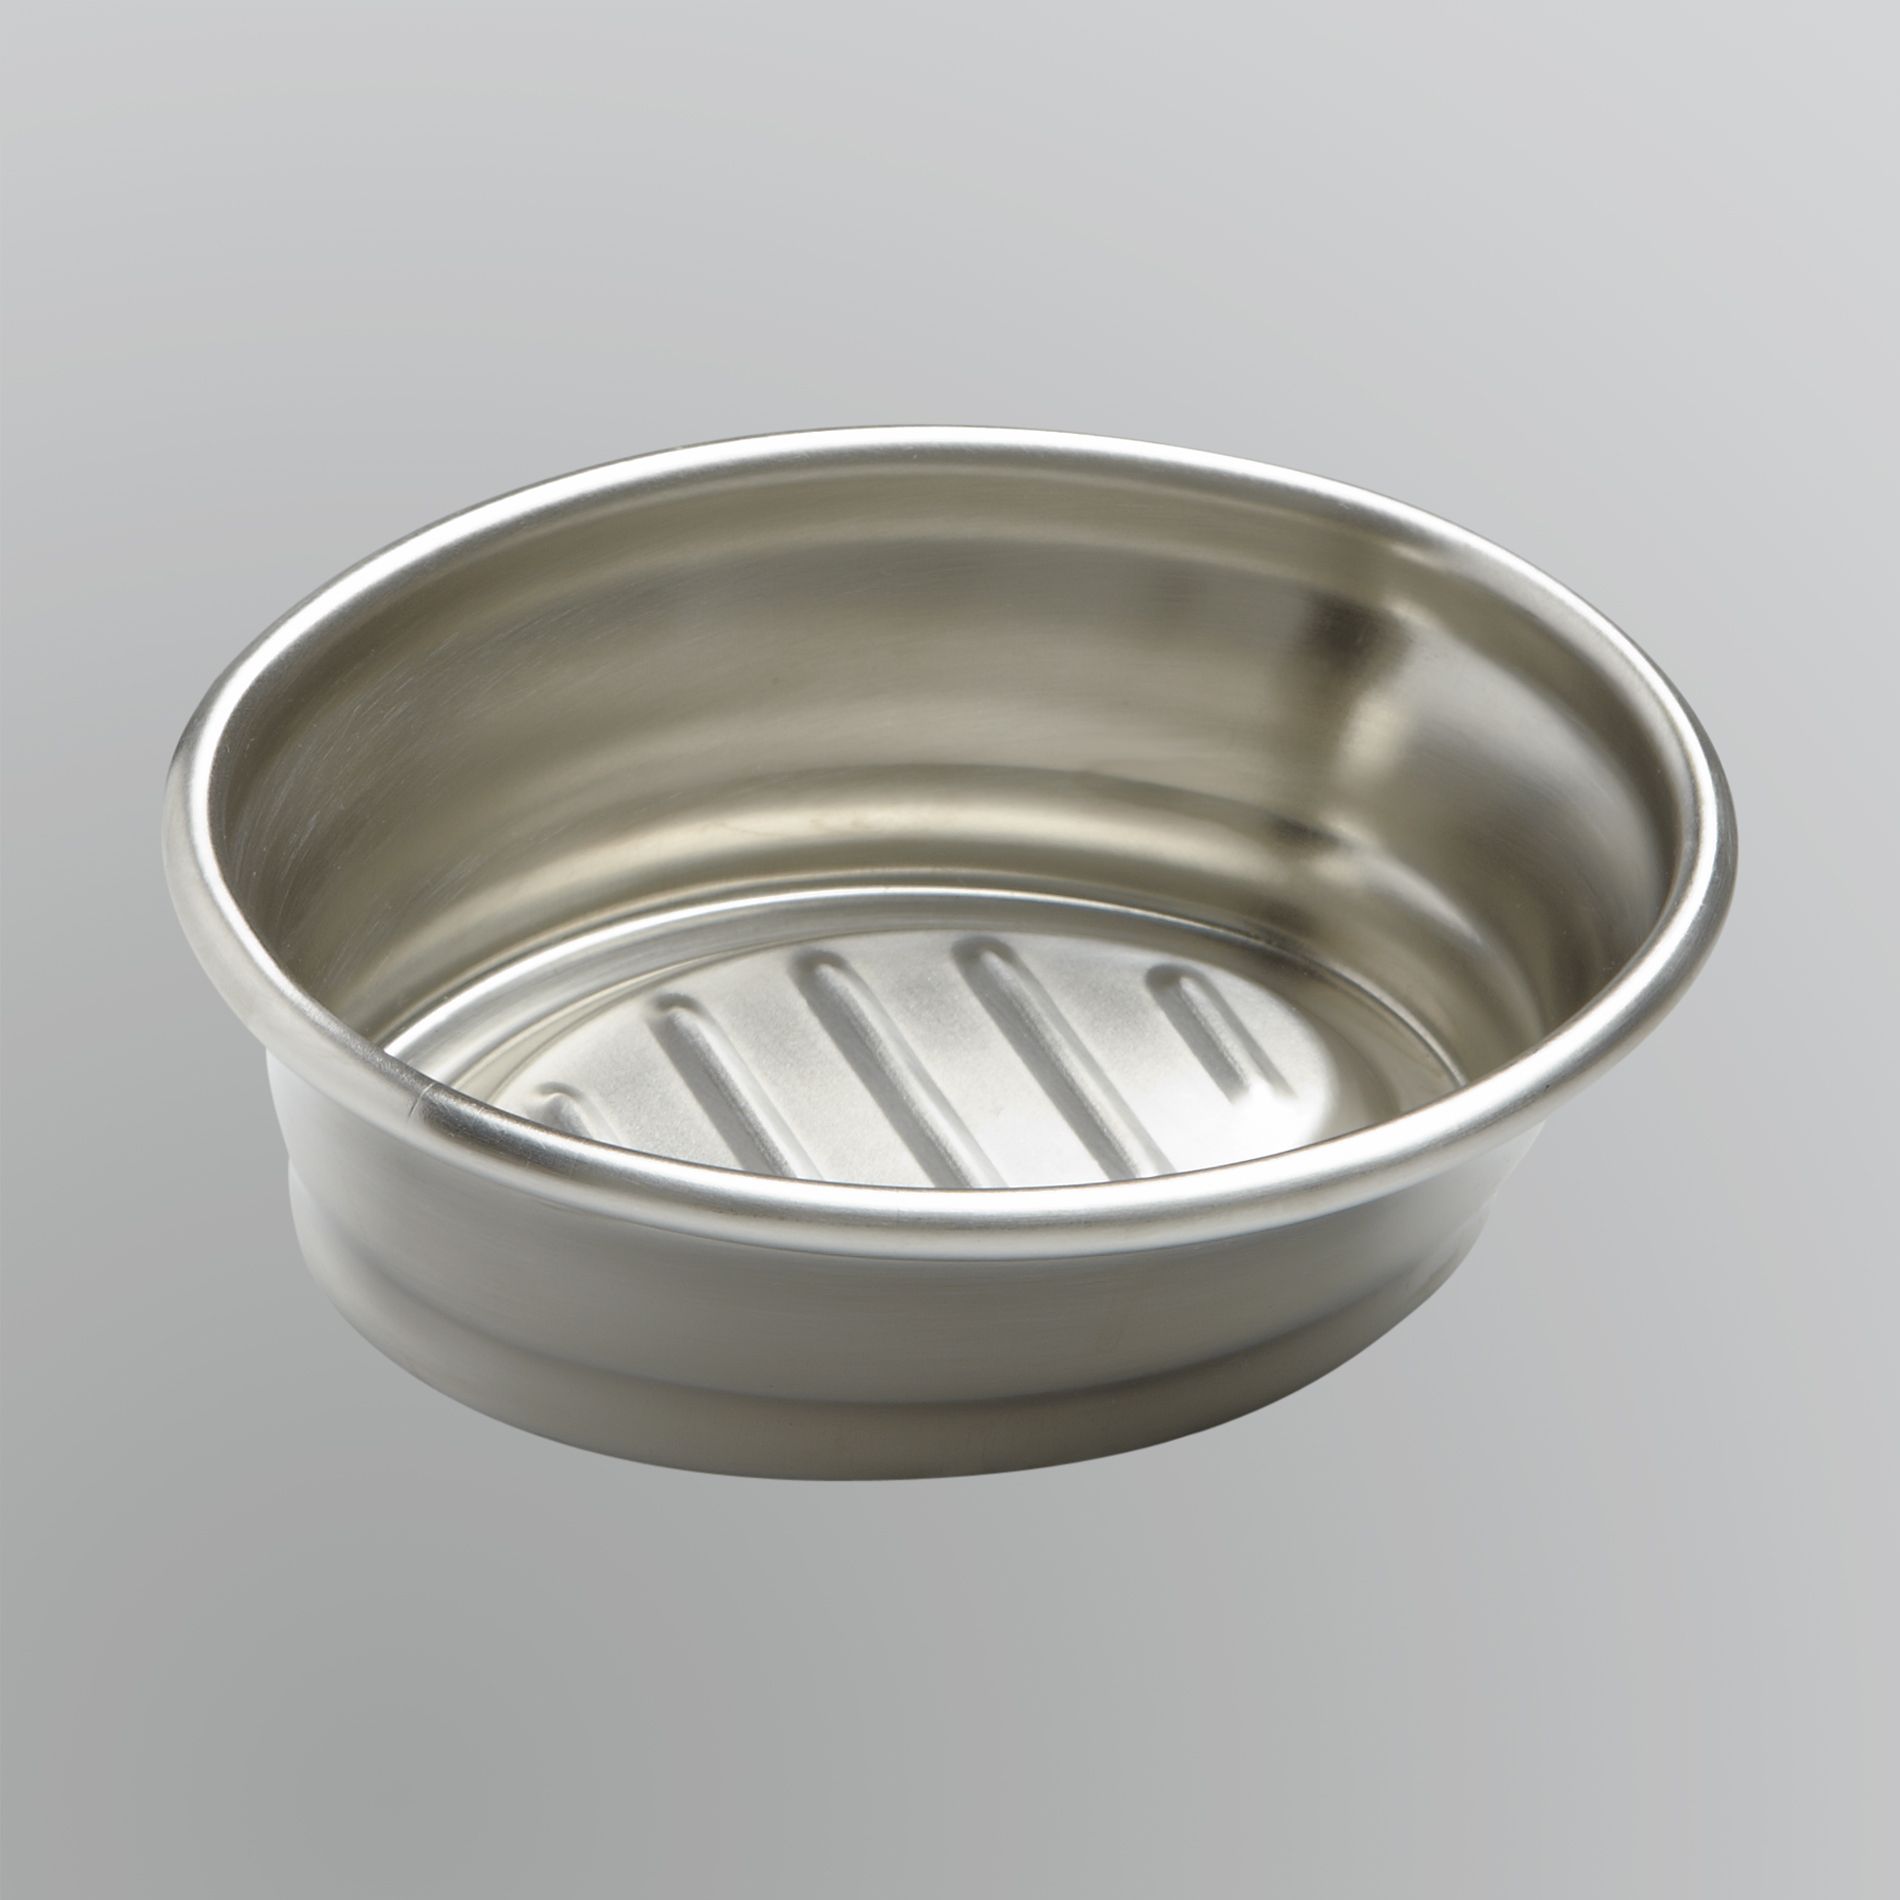 Inter Design InterDesign Neo Brushed stainless Steel Soap Dish